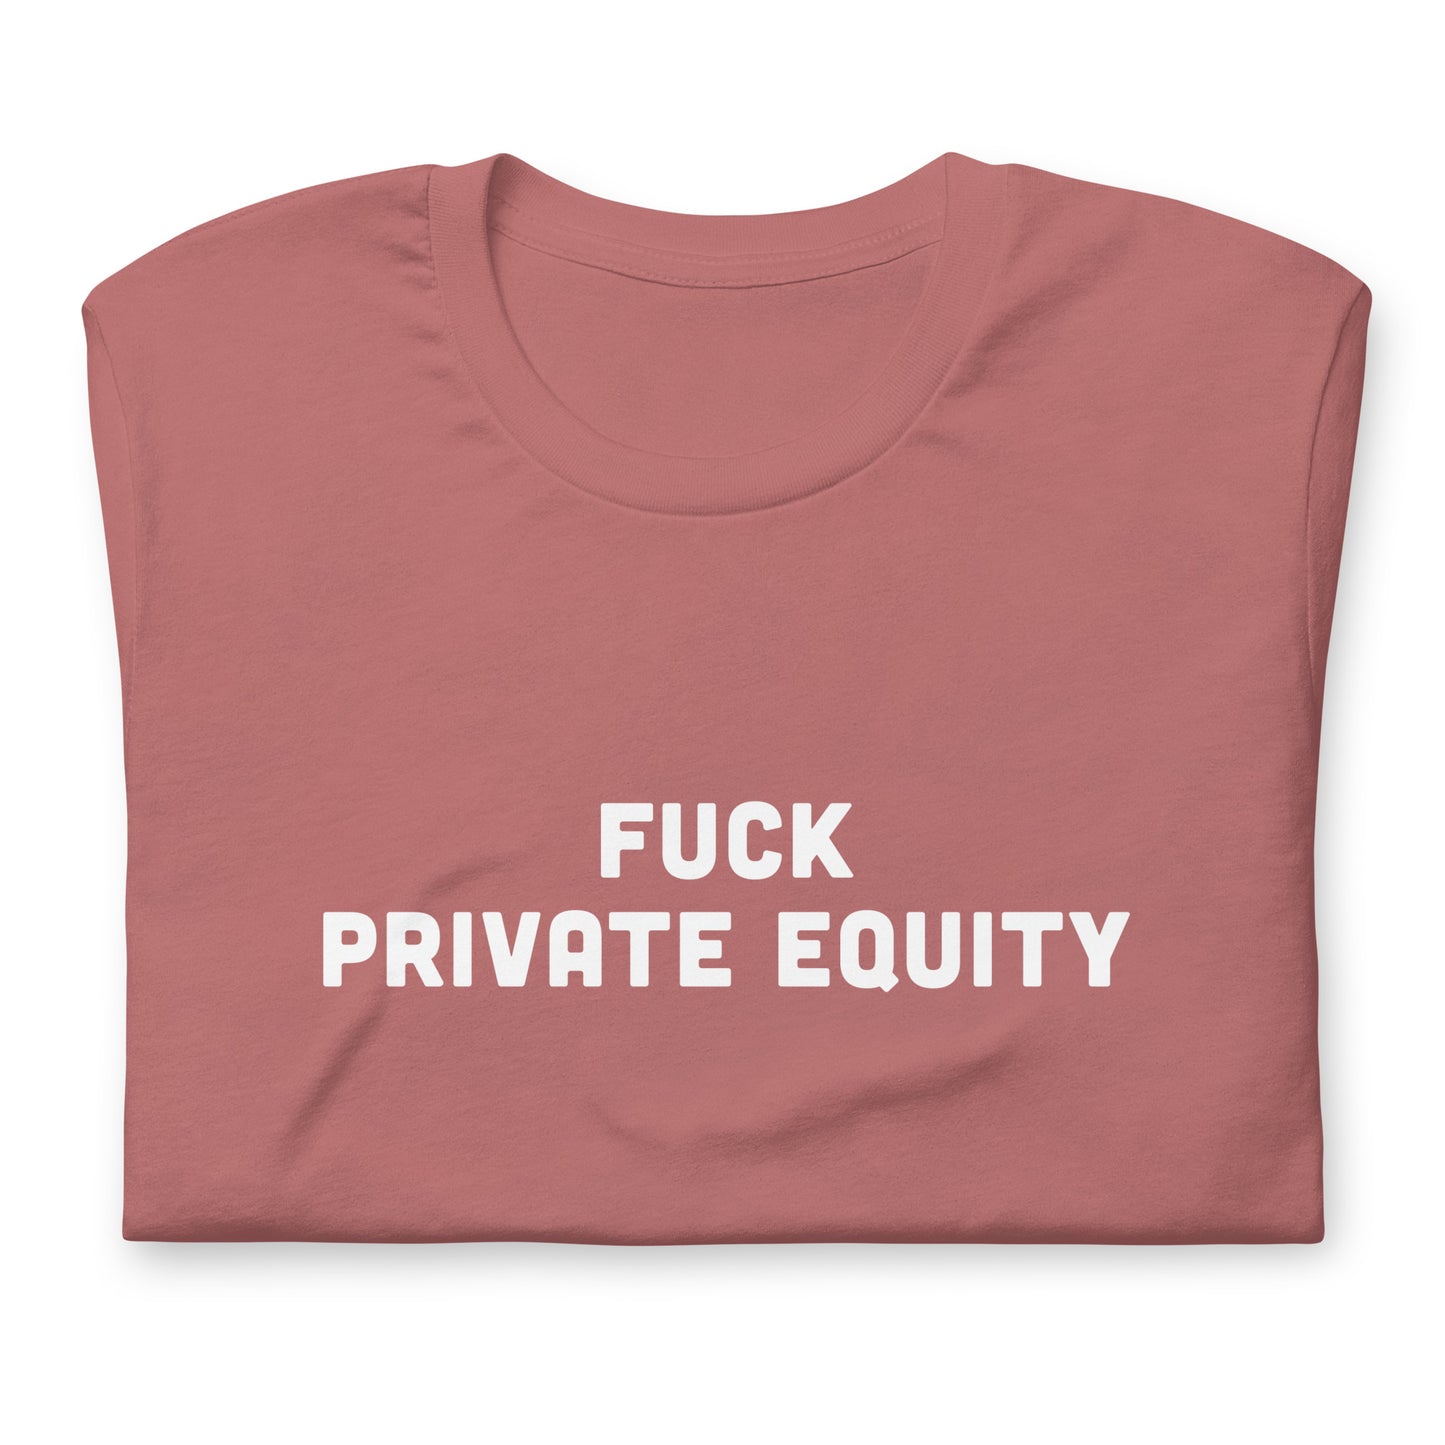 Fuck Private Equity T-Shirt Size 2XL Color Navy